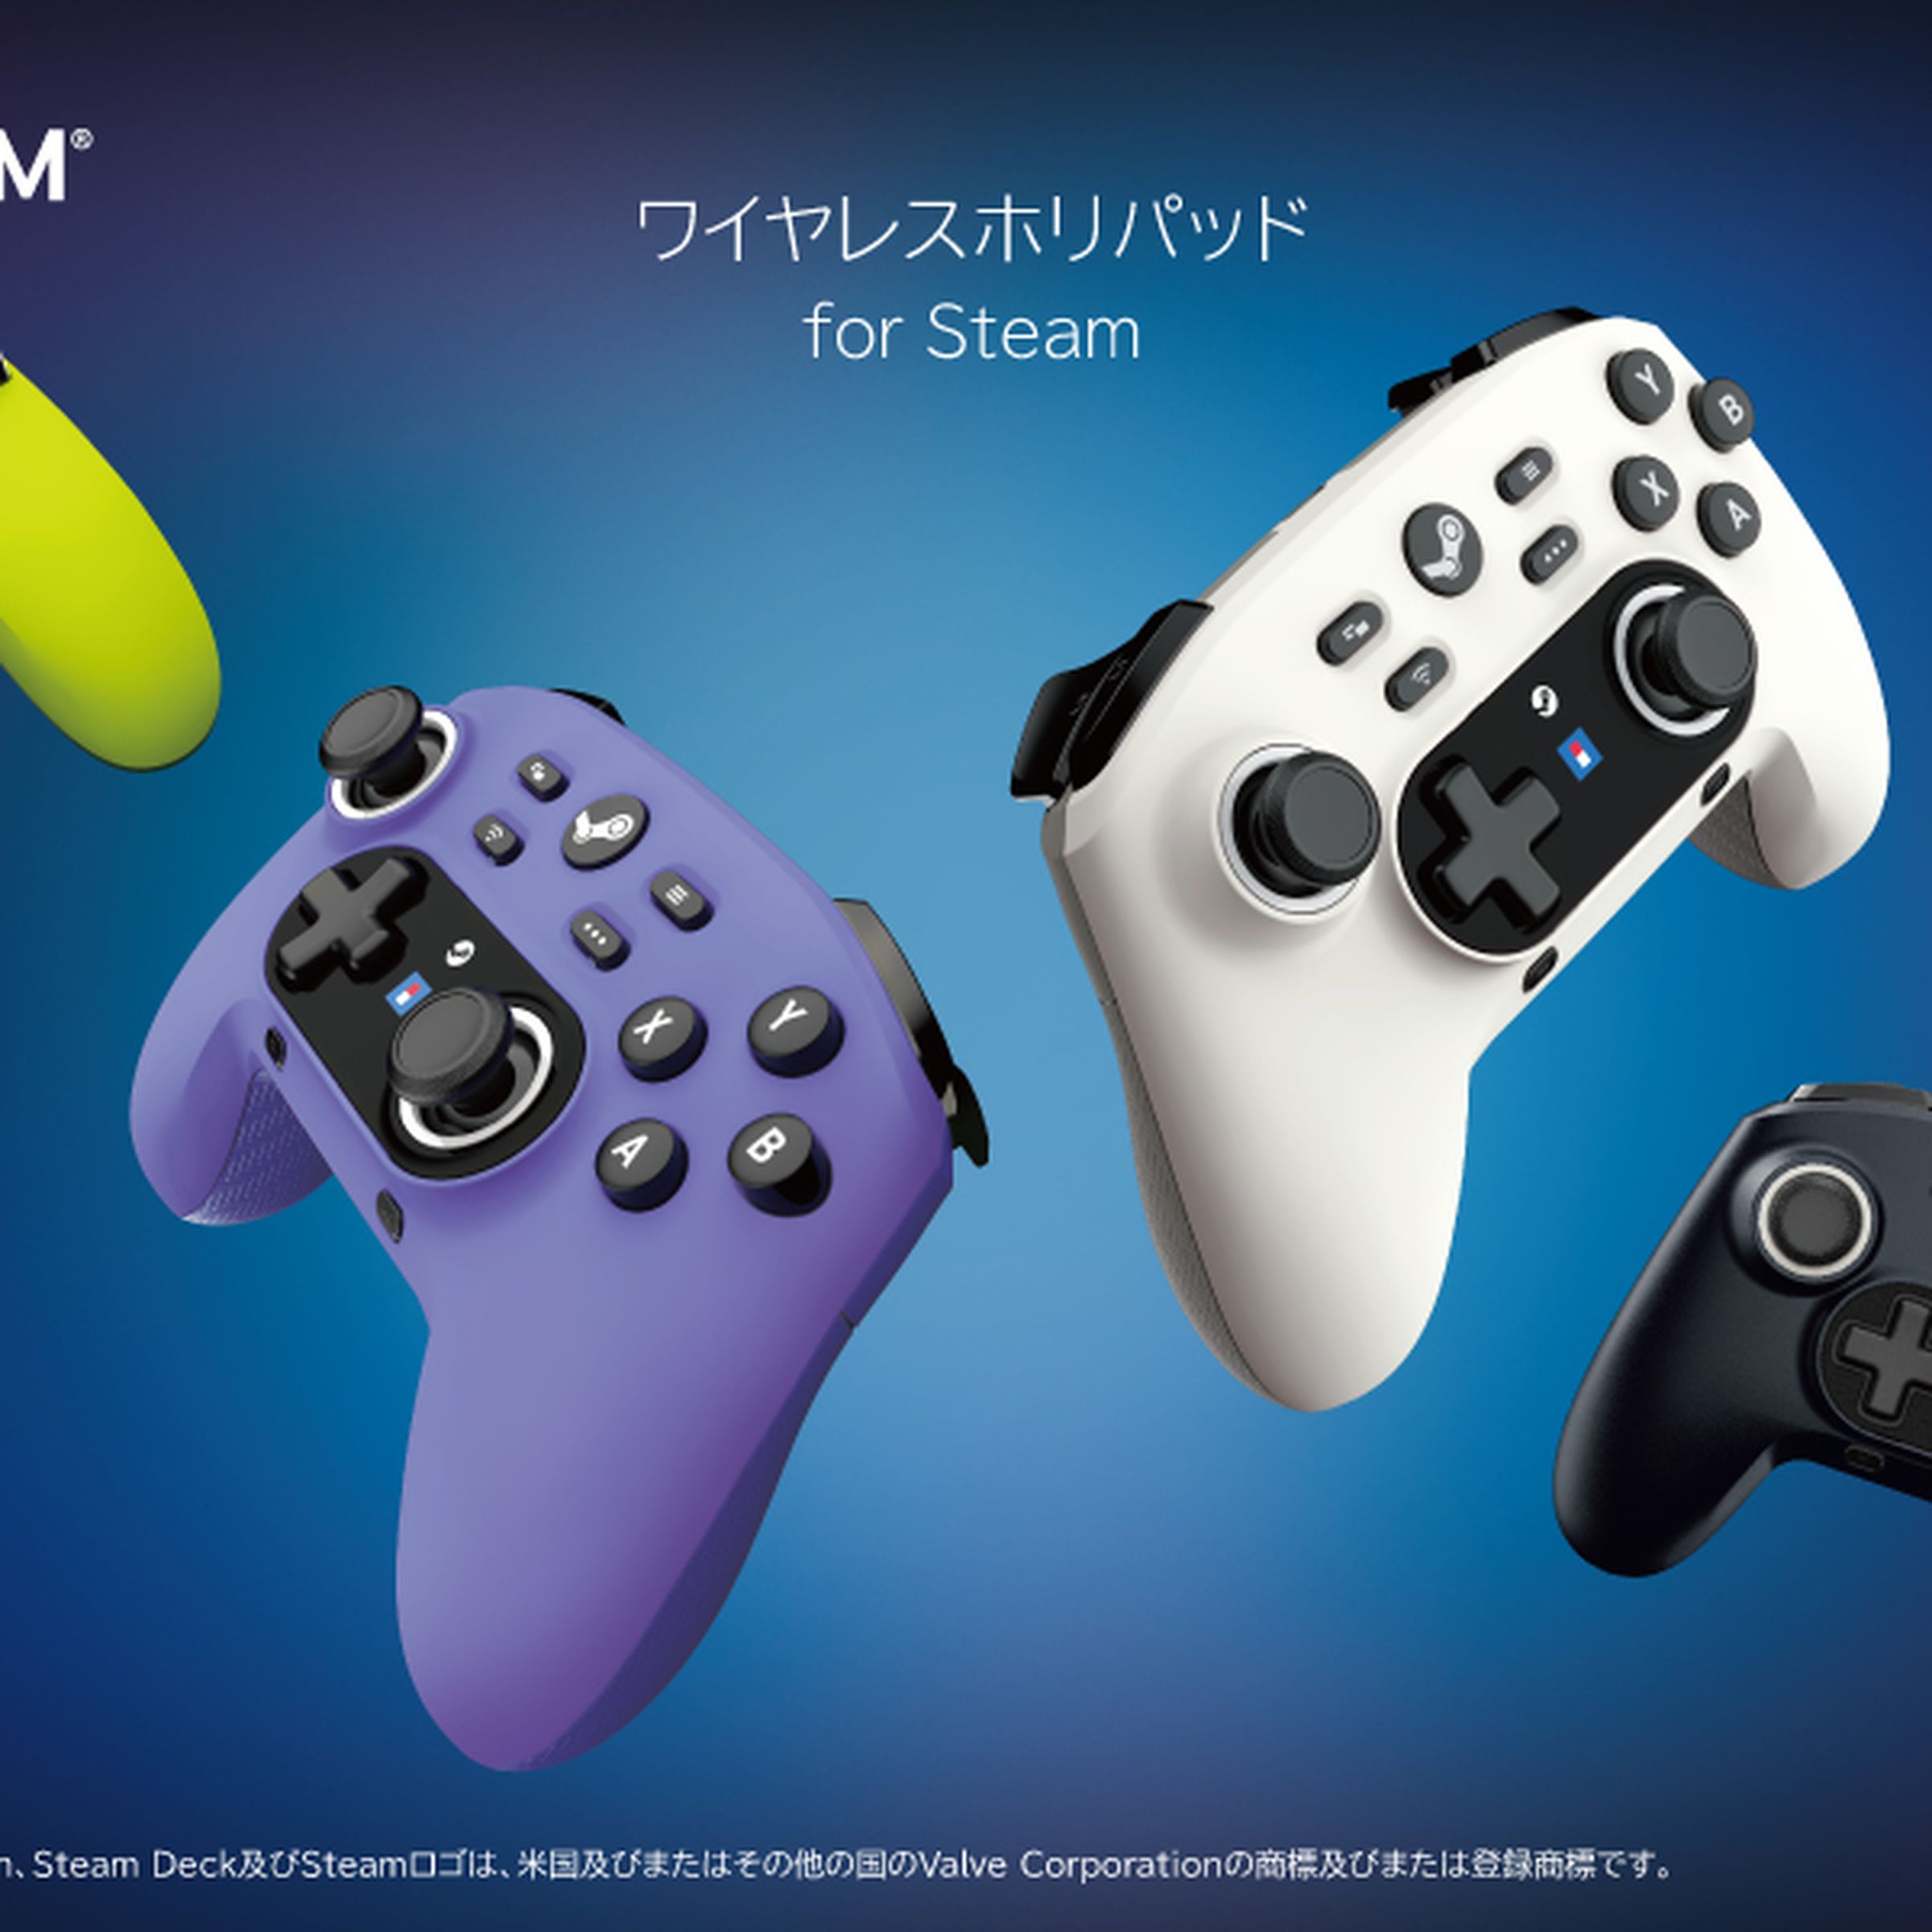 Four colors of the Wireless Horipad controller for Steam (yellow, violet, white, and black) against a blue background.